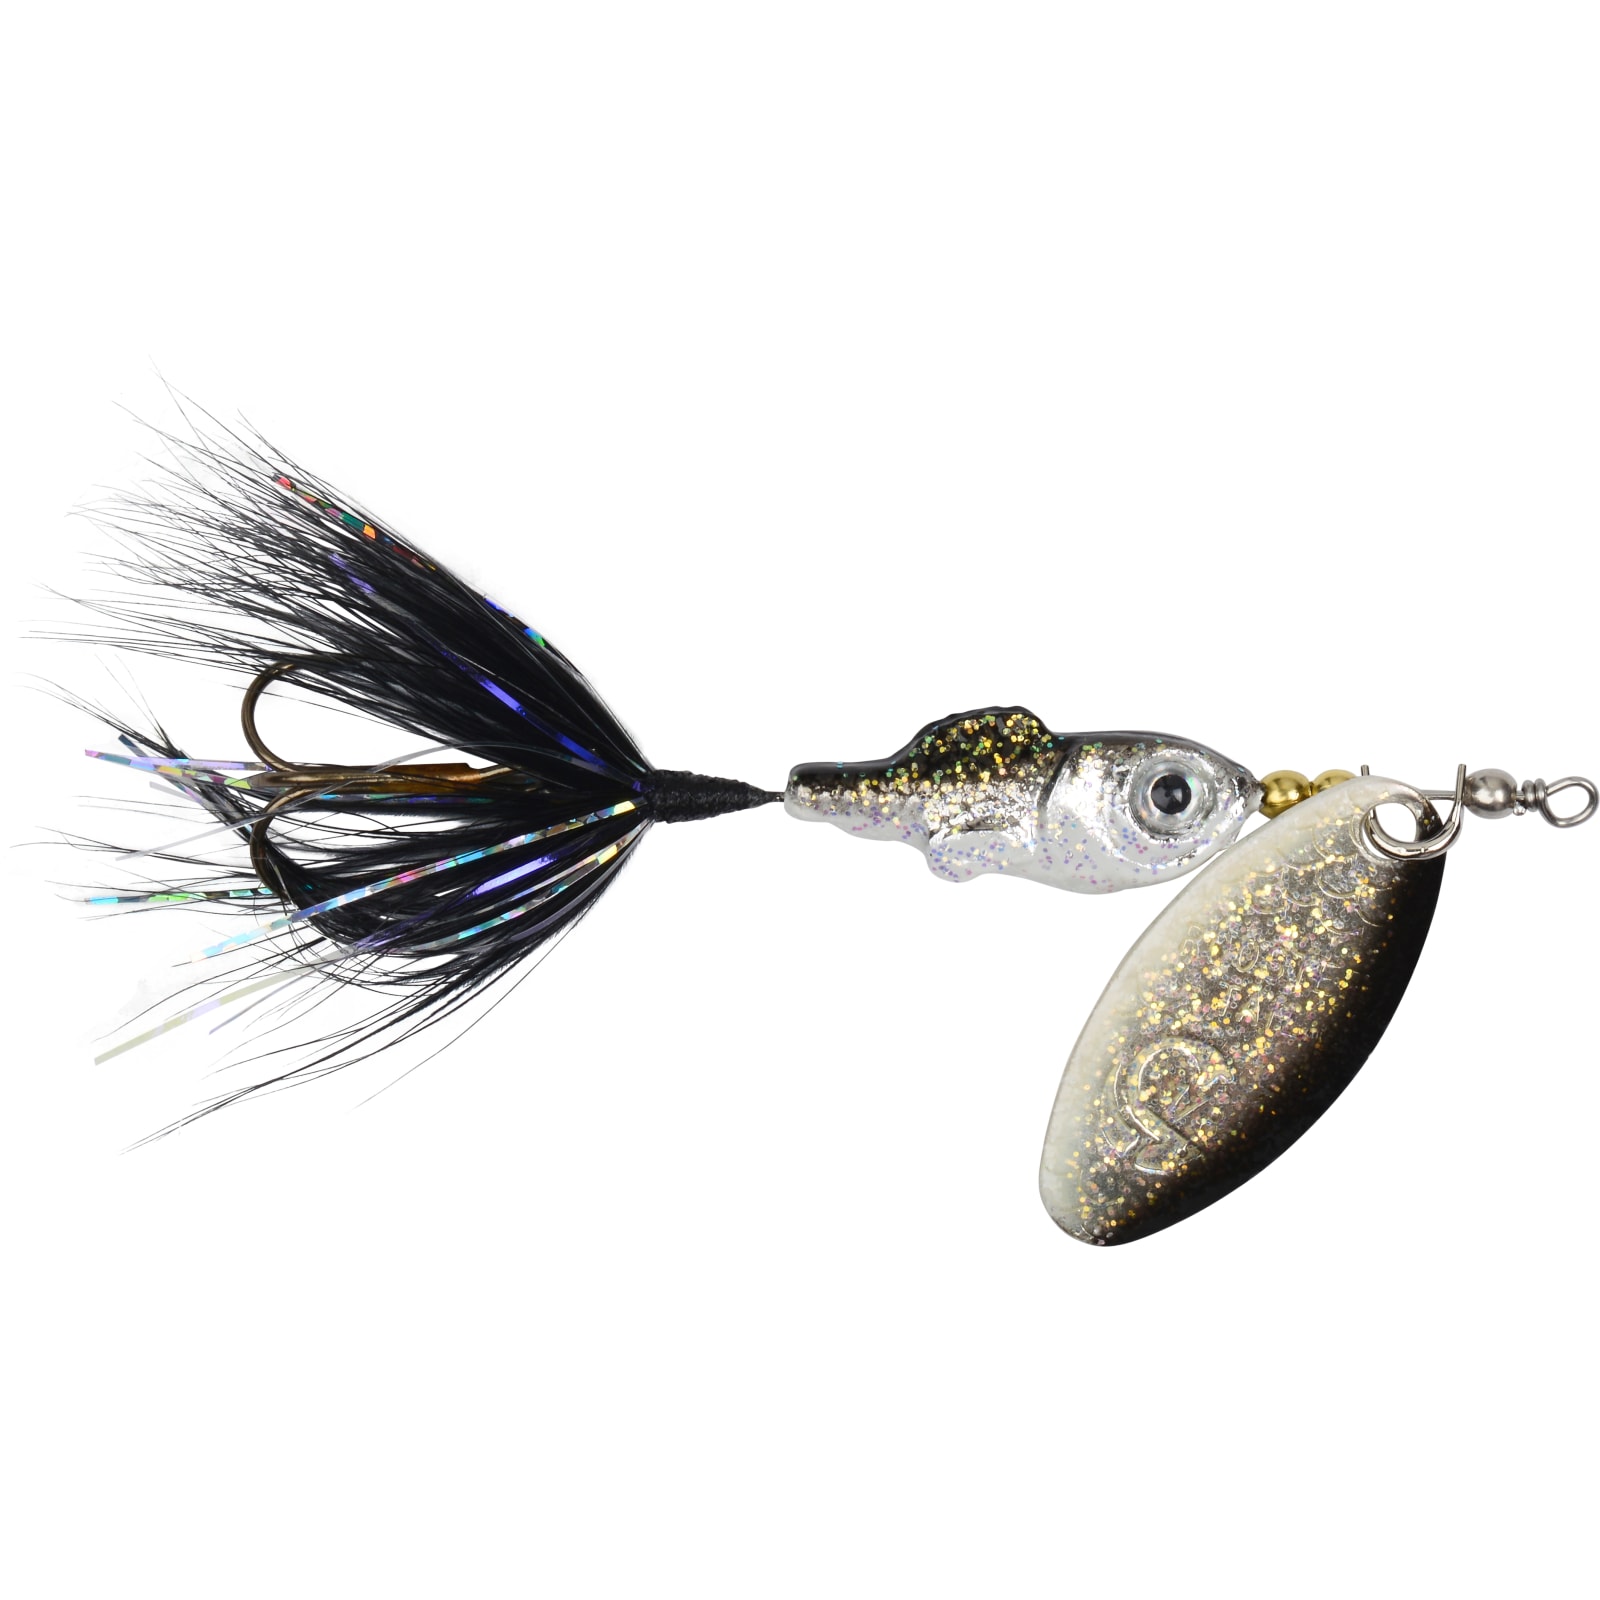 Rooster Tail Minnow Spinner - Natural Shad by Worden's at Fleet Farm